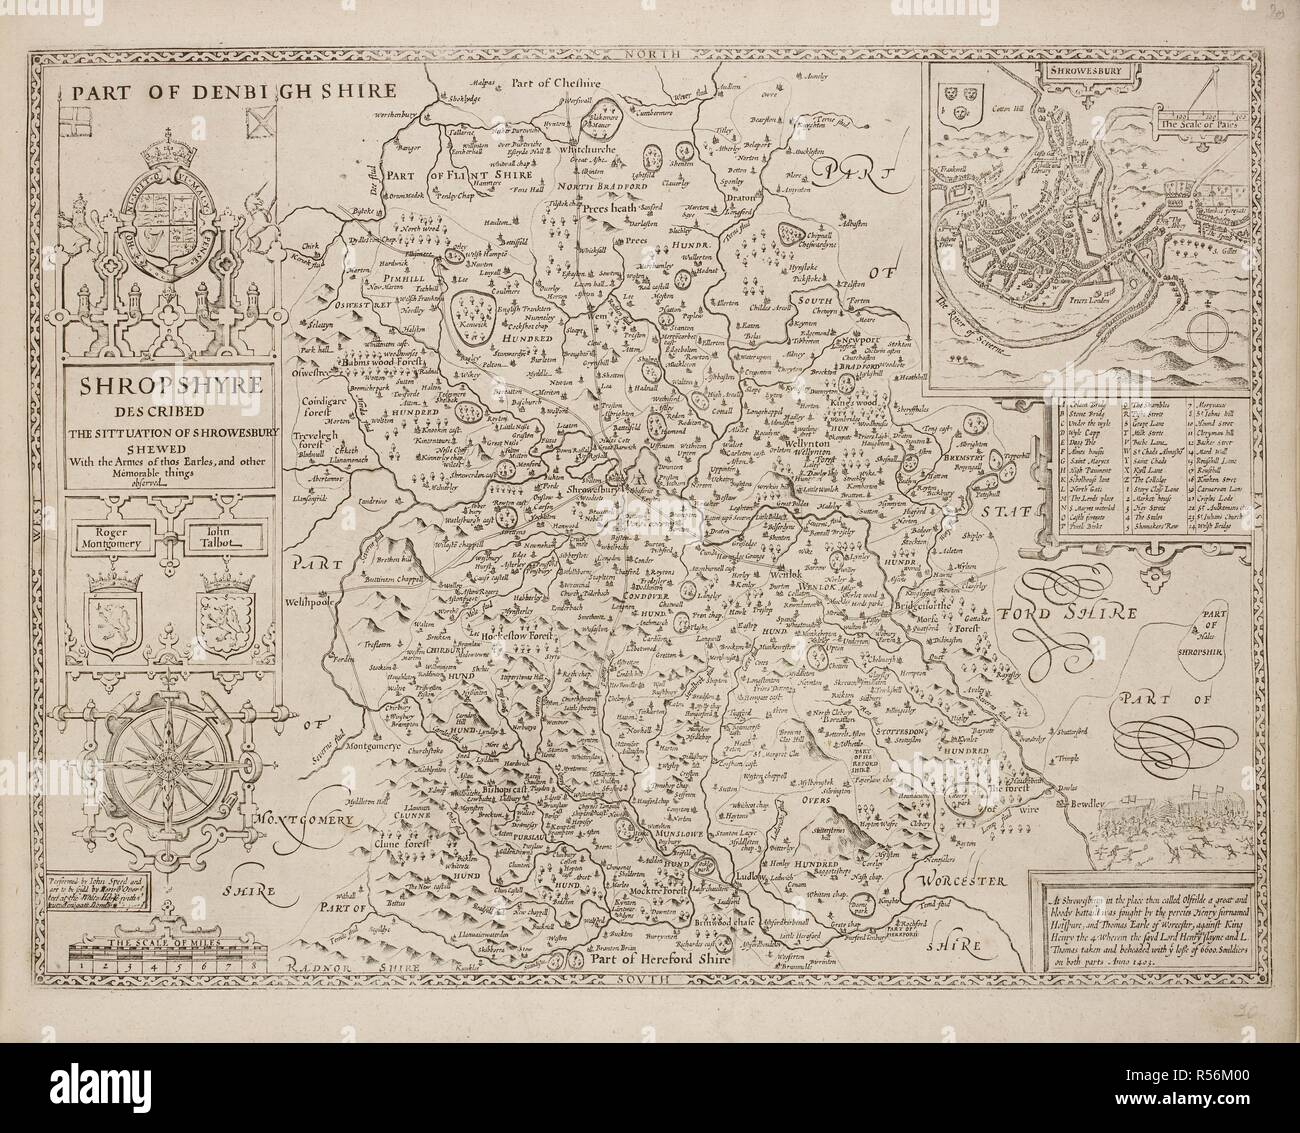 A map of Shropshyre, or the county of Shropshire. . A collection of 37 Maps of the counties of England. London. H. Overton, 1714. A collection of 37 Maps of the counties of England, being reprints, of J. Speedâ€™s maps, by Henry Overton, together with those of P. Stent reprinted by John Overton, and maps of Derbyshire and Yorkshire engraved by S. Nicholls. Source: Maps.145.c.9 20. Language: English. Stock Photo